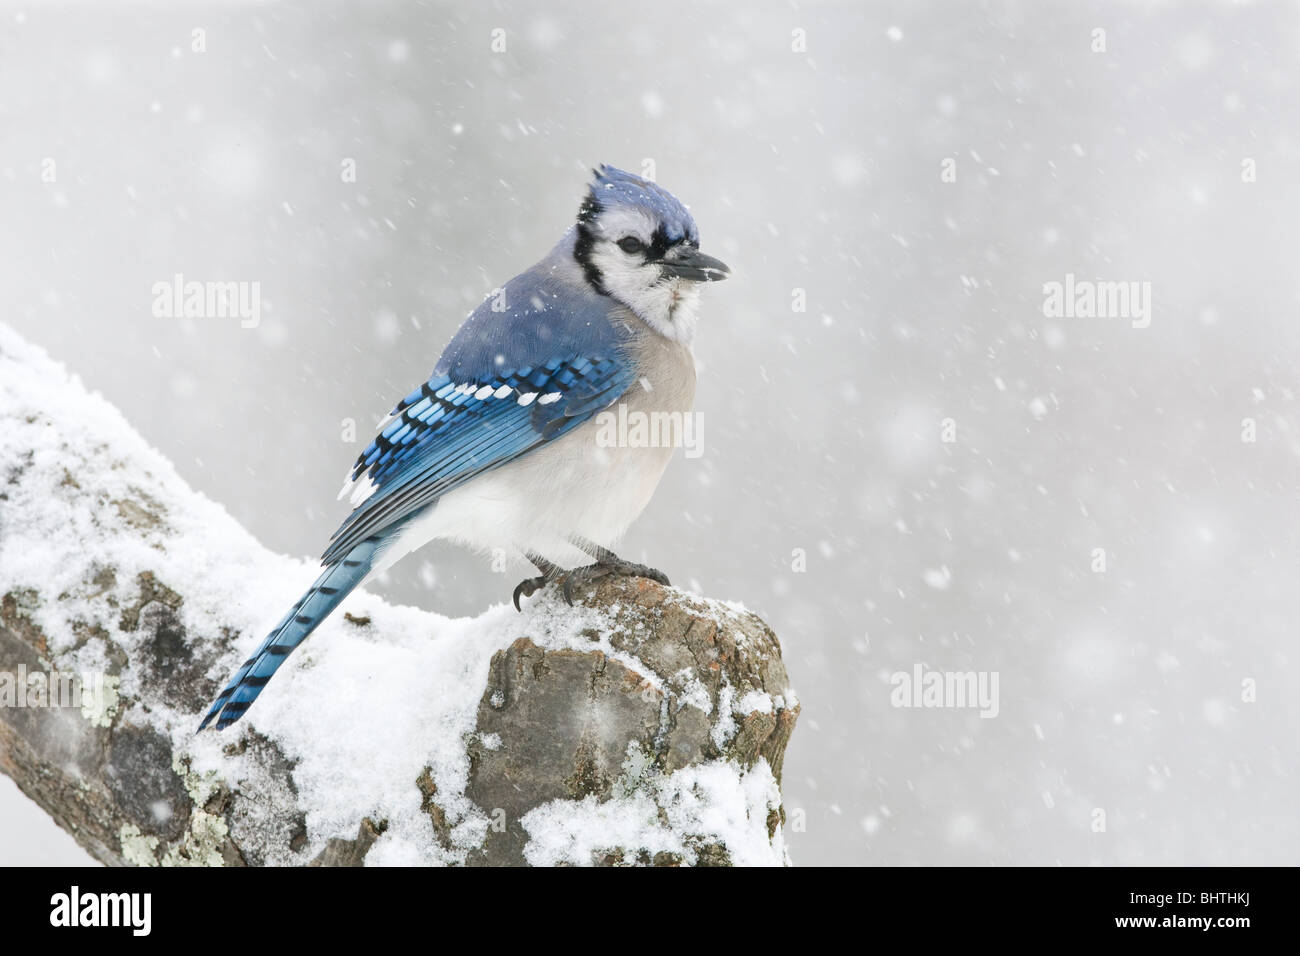 Blue Jay perched in falling snow Stock Photo